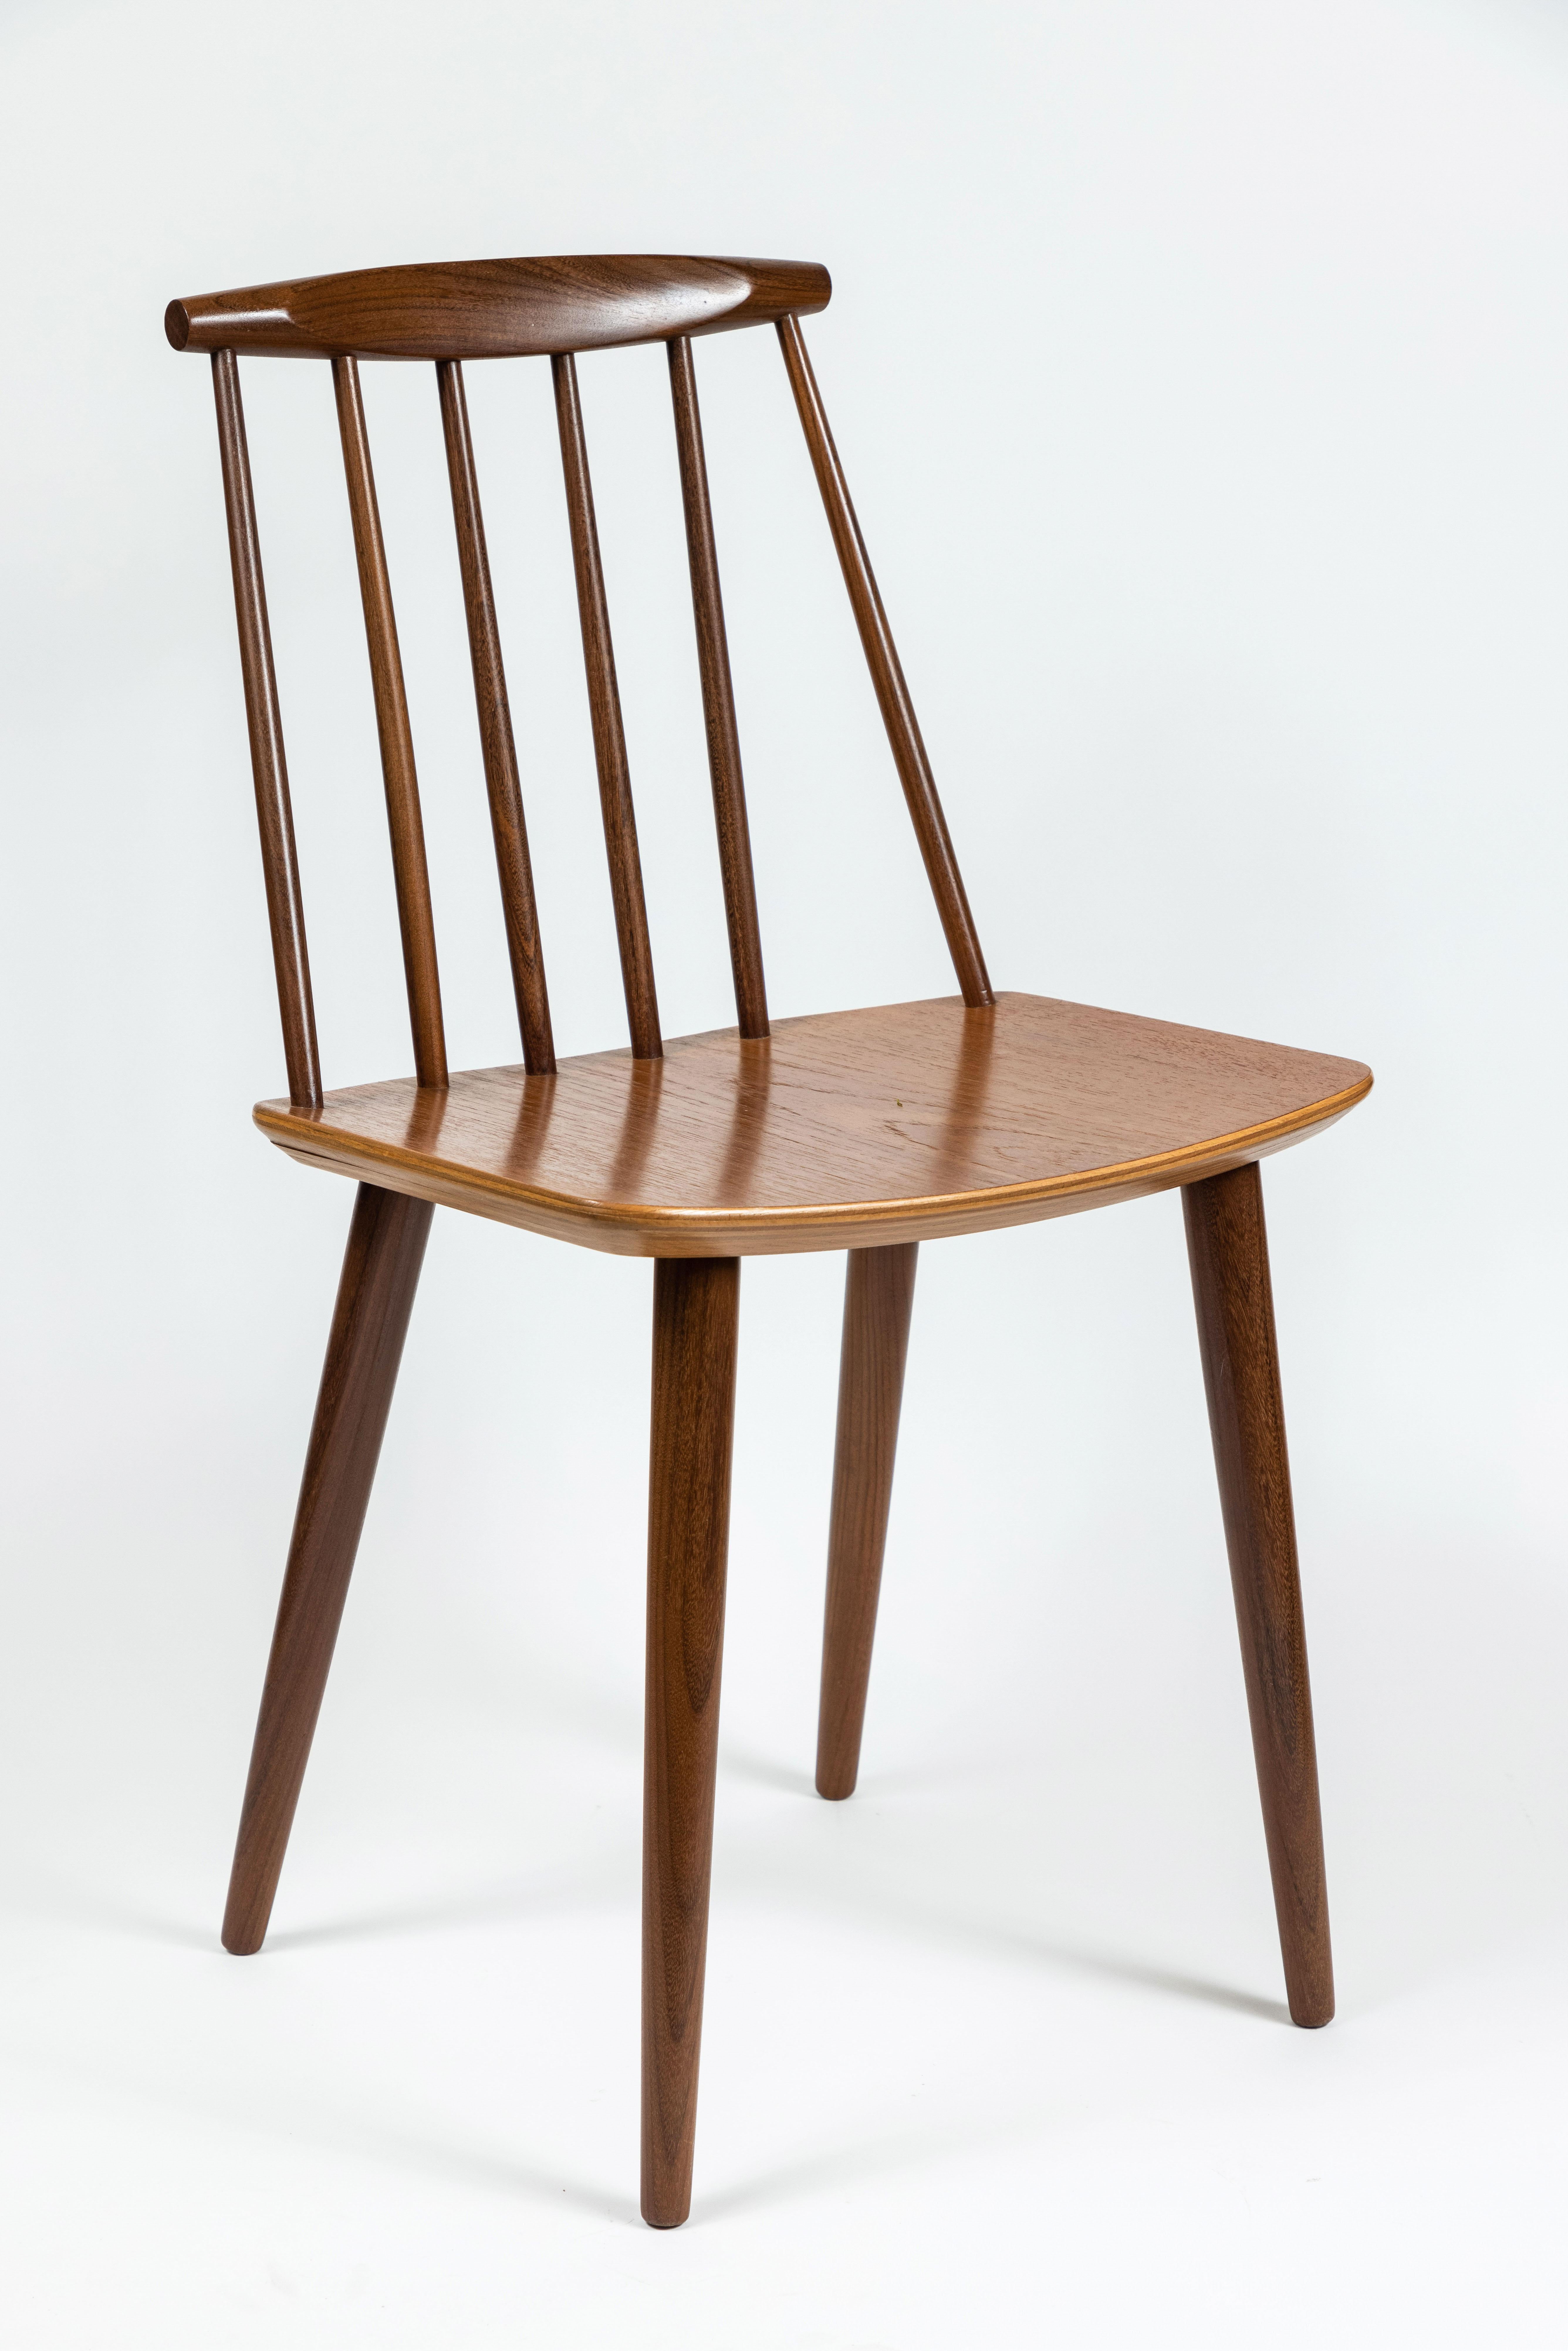 The J77 dining chairs, designed by Folke Pålsson, are a classic wooden chair made of solid beech. The wide seat and curved spindle back create a comfortable seating pose

Featuring the traditions of Scandinavian design, both classic and